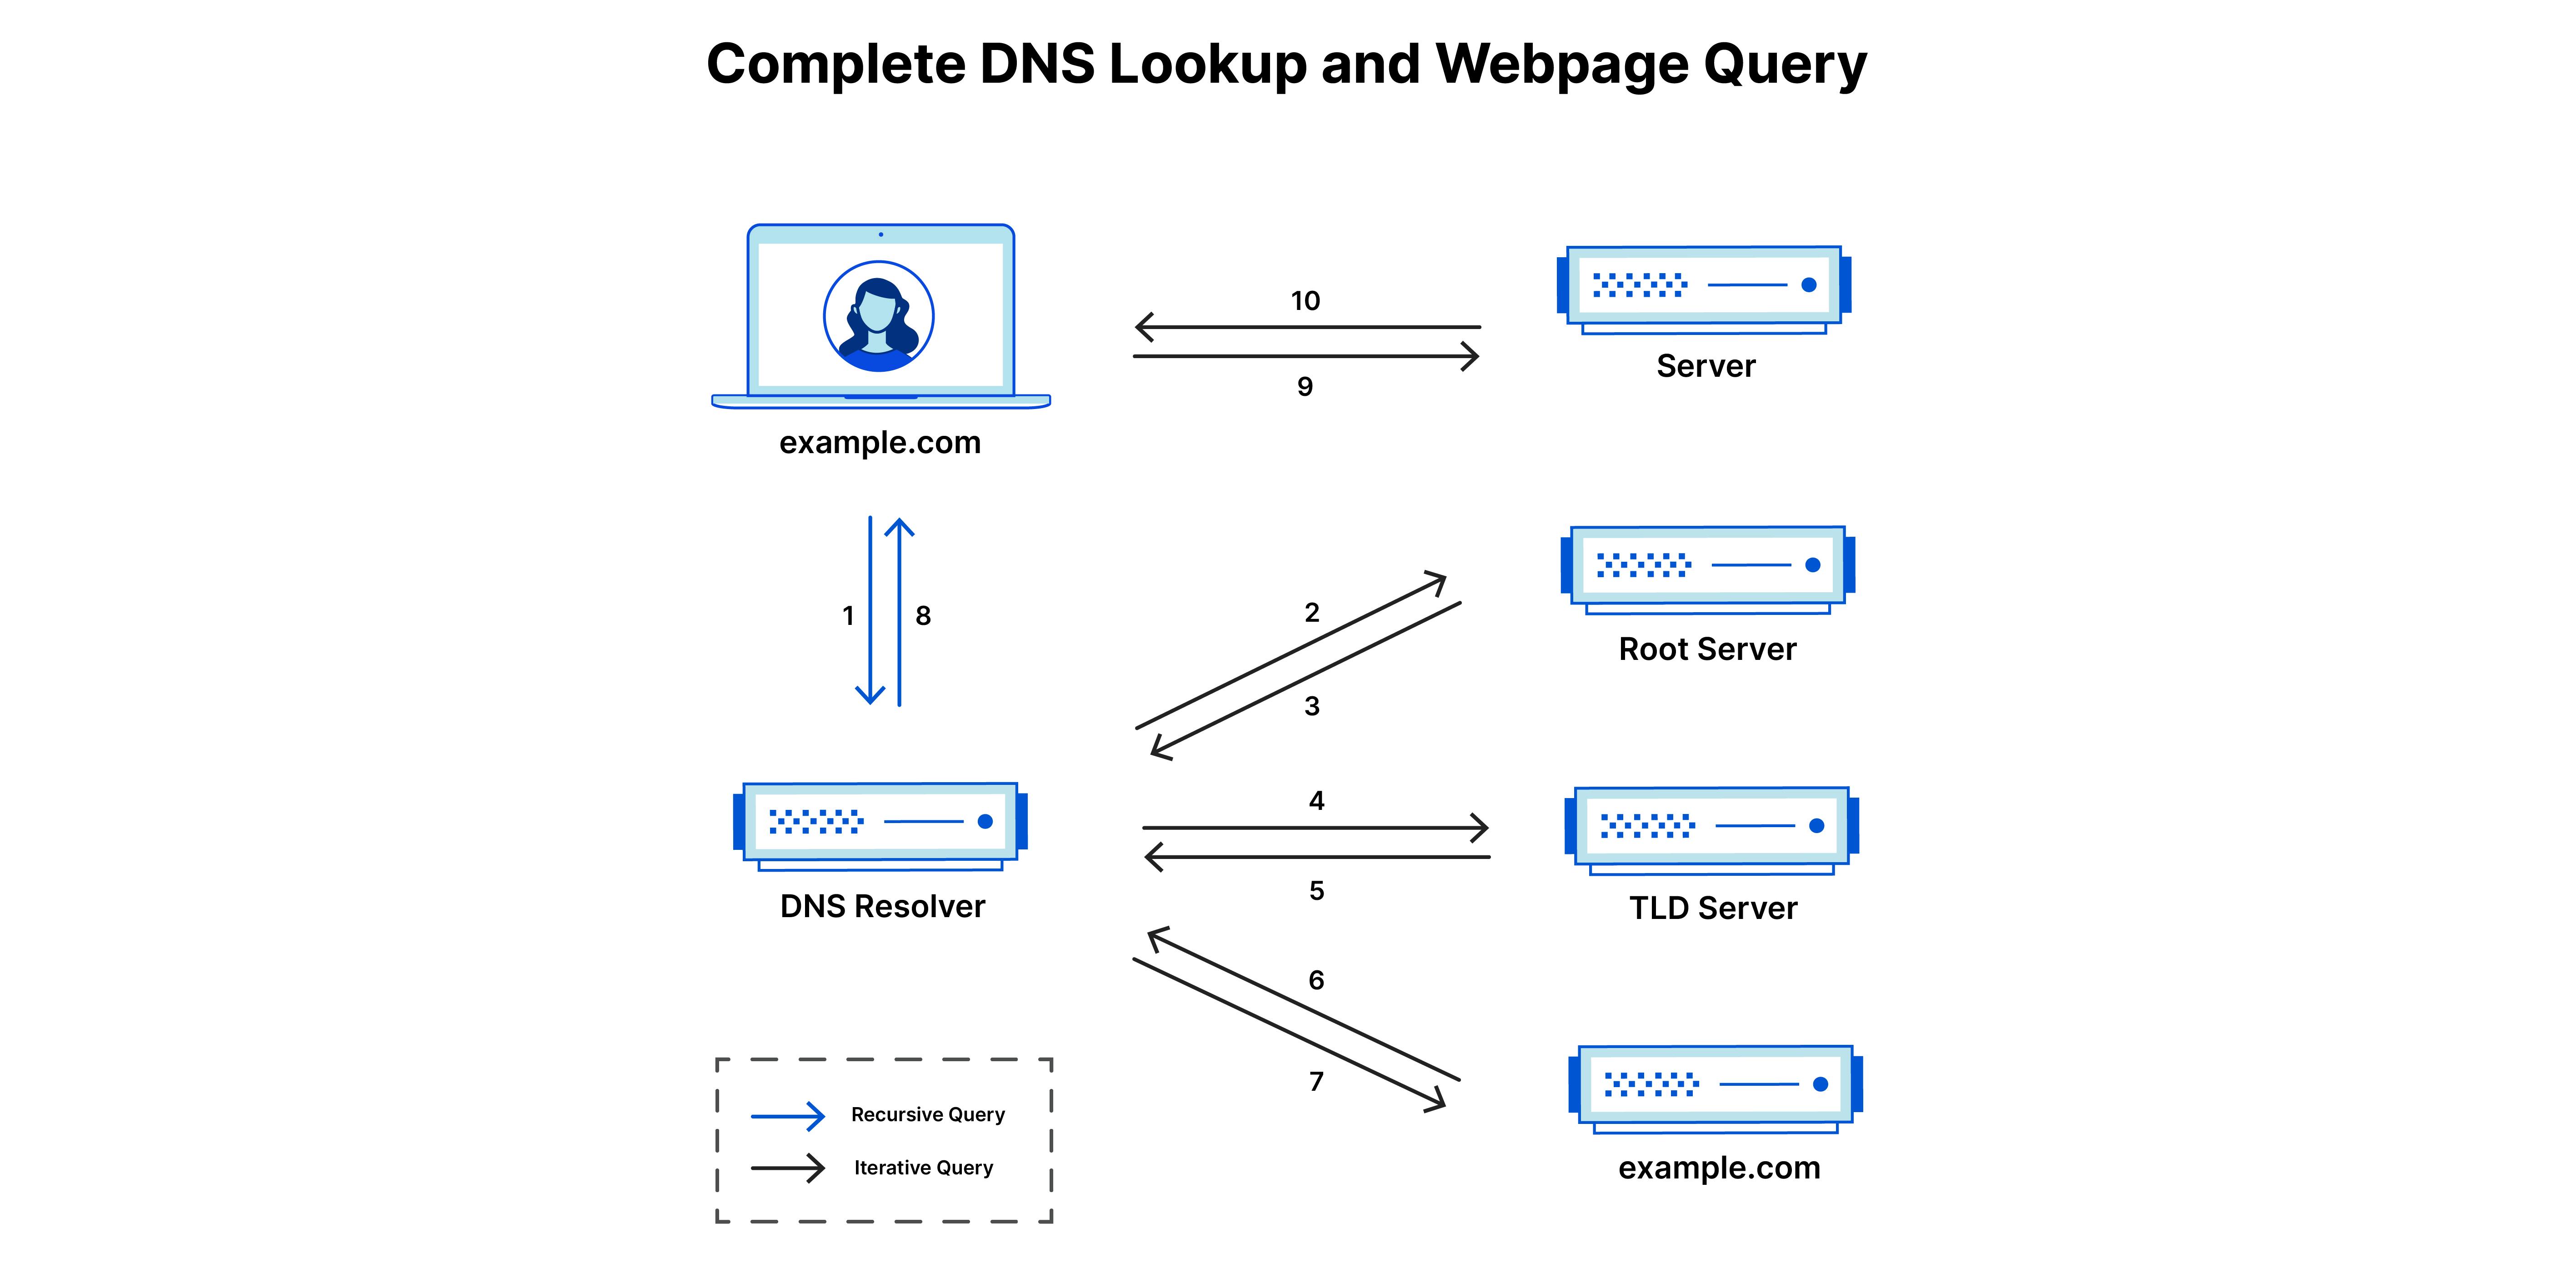 Complete DNS lookup and webpage query